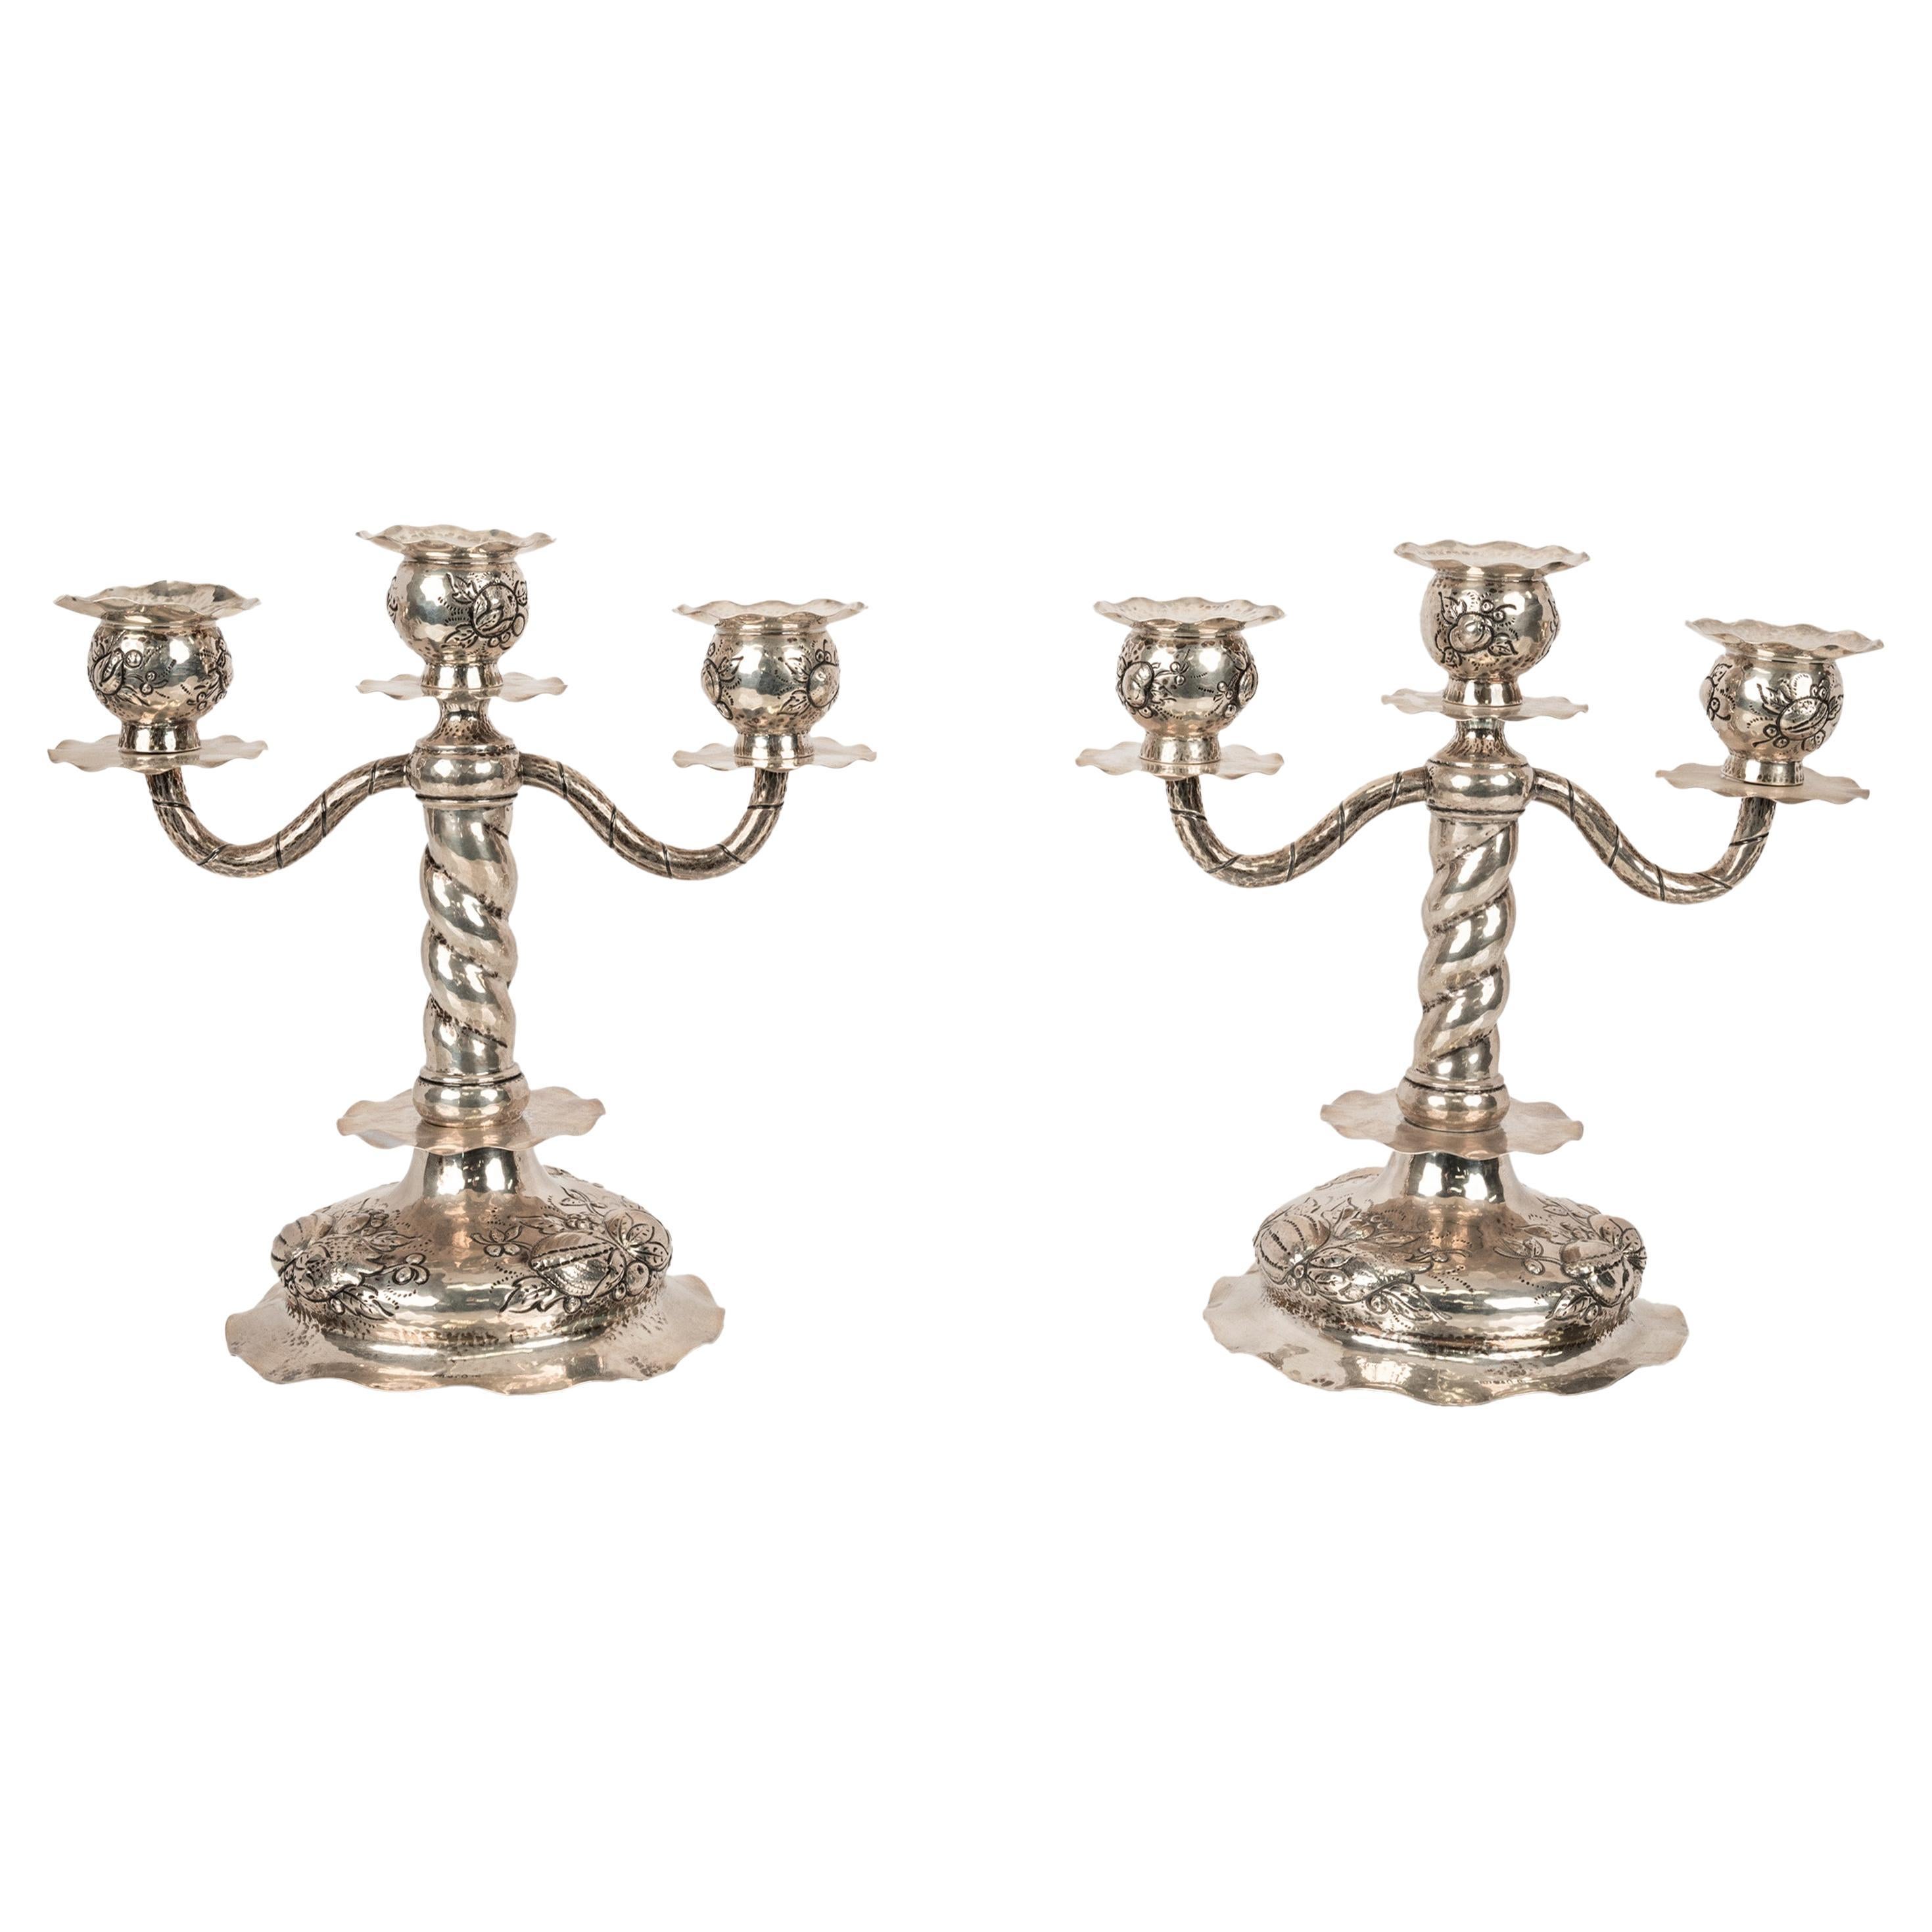 A very elegant pair of antique Art Deco silver three branch candelabrum/candlesticks, C G Hallberg, Stockholm Sweden, 1927. 
The twin arm candelabras having three candle bobeches each engraved stylized floral decoration, each with a wavy edge drip